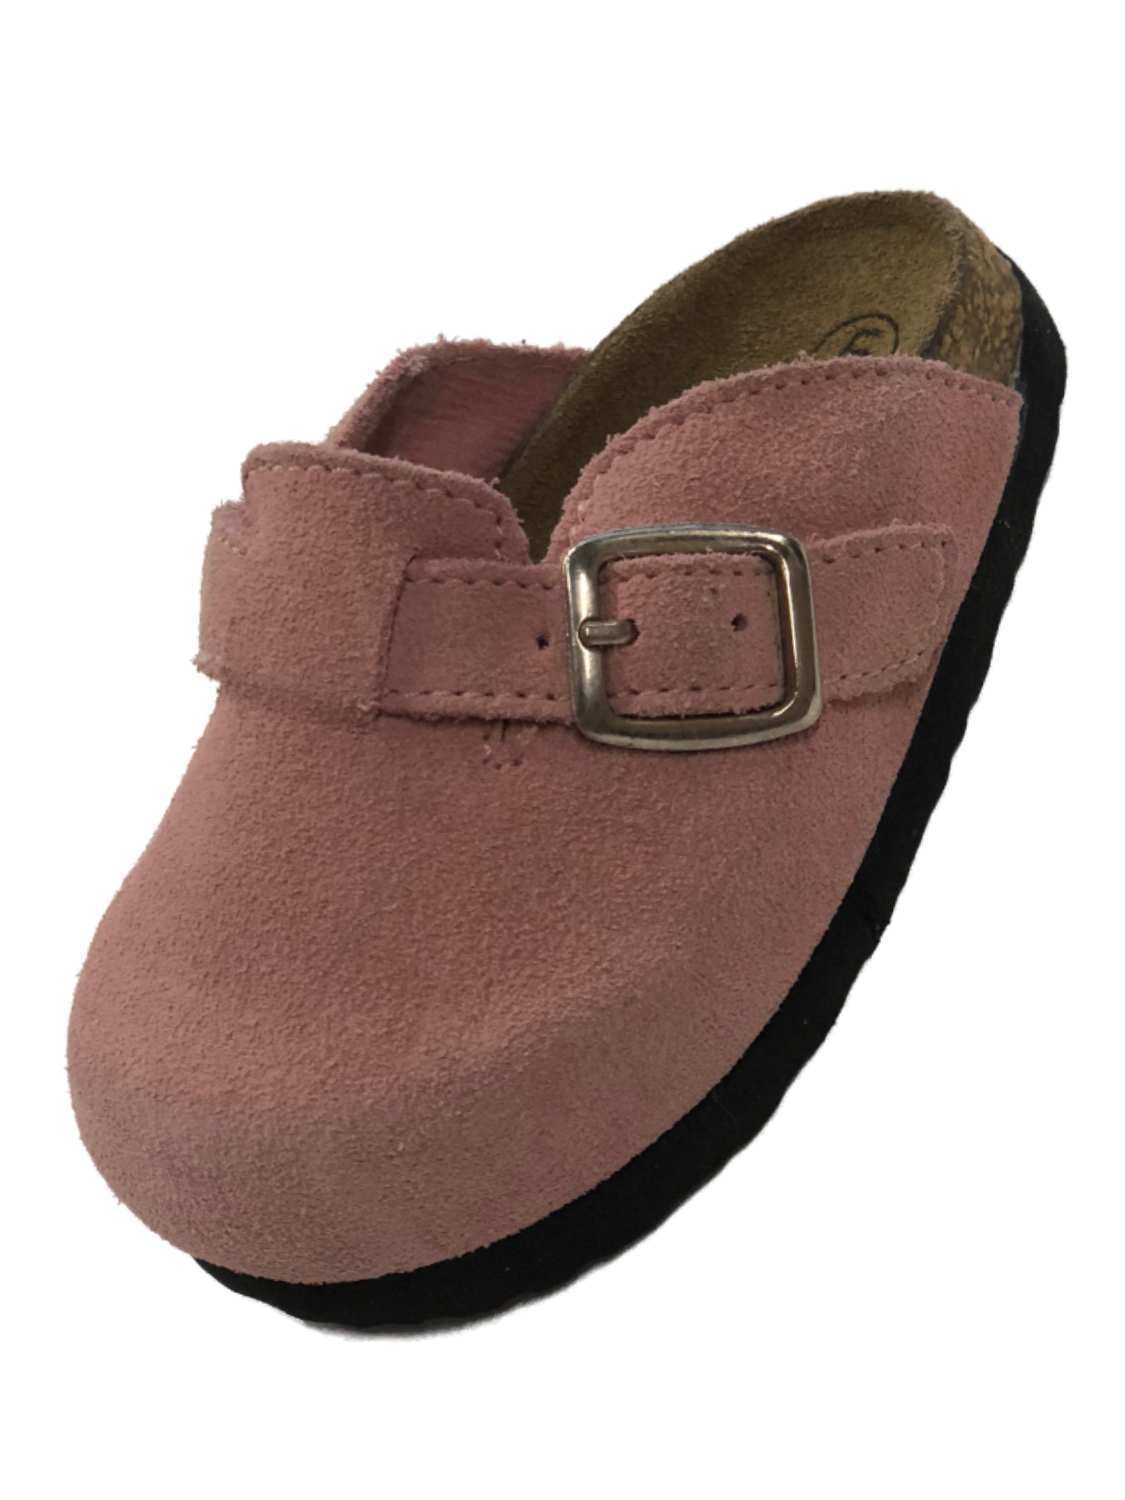 DOGGERS YOUTH KIDS TAN Clog with Strap Shoe Ultra LIte Comfort Slip On Cr cs 